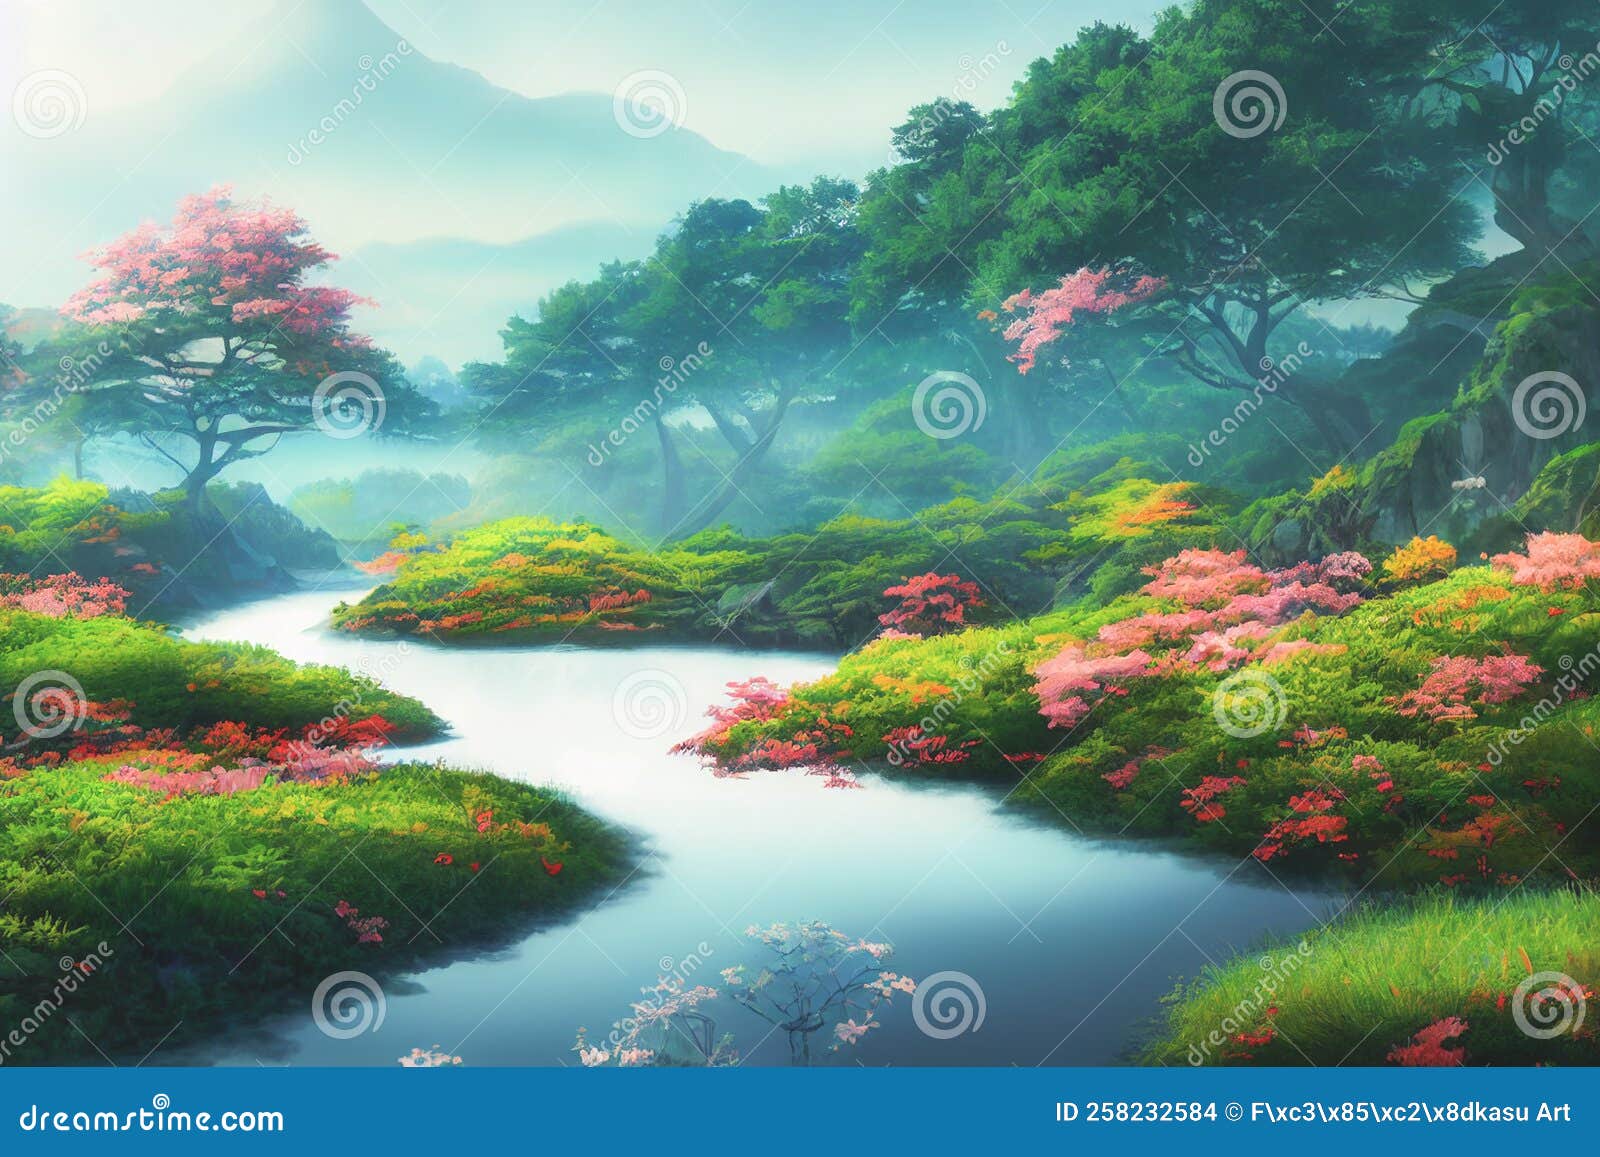 Japan Anime Scenery Wallpaper Featuring Beautiful Pink Cherry Trees and  Mount Fuji in the Background Stock Illustration - Illustration of  attraction, drawing: 258232584